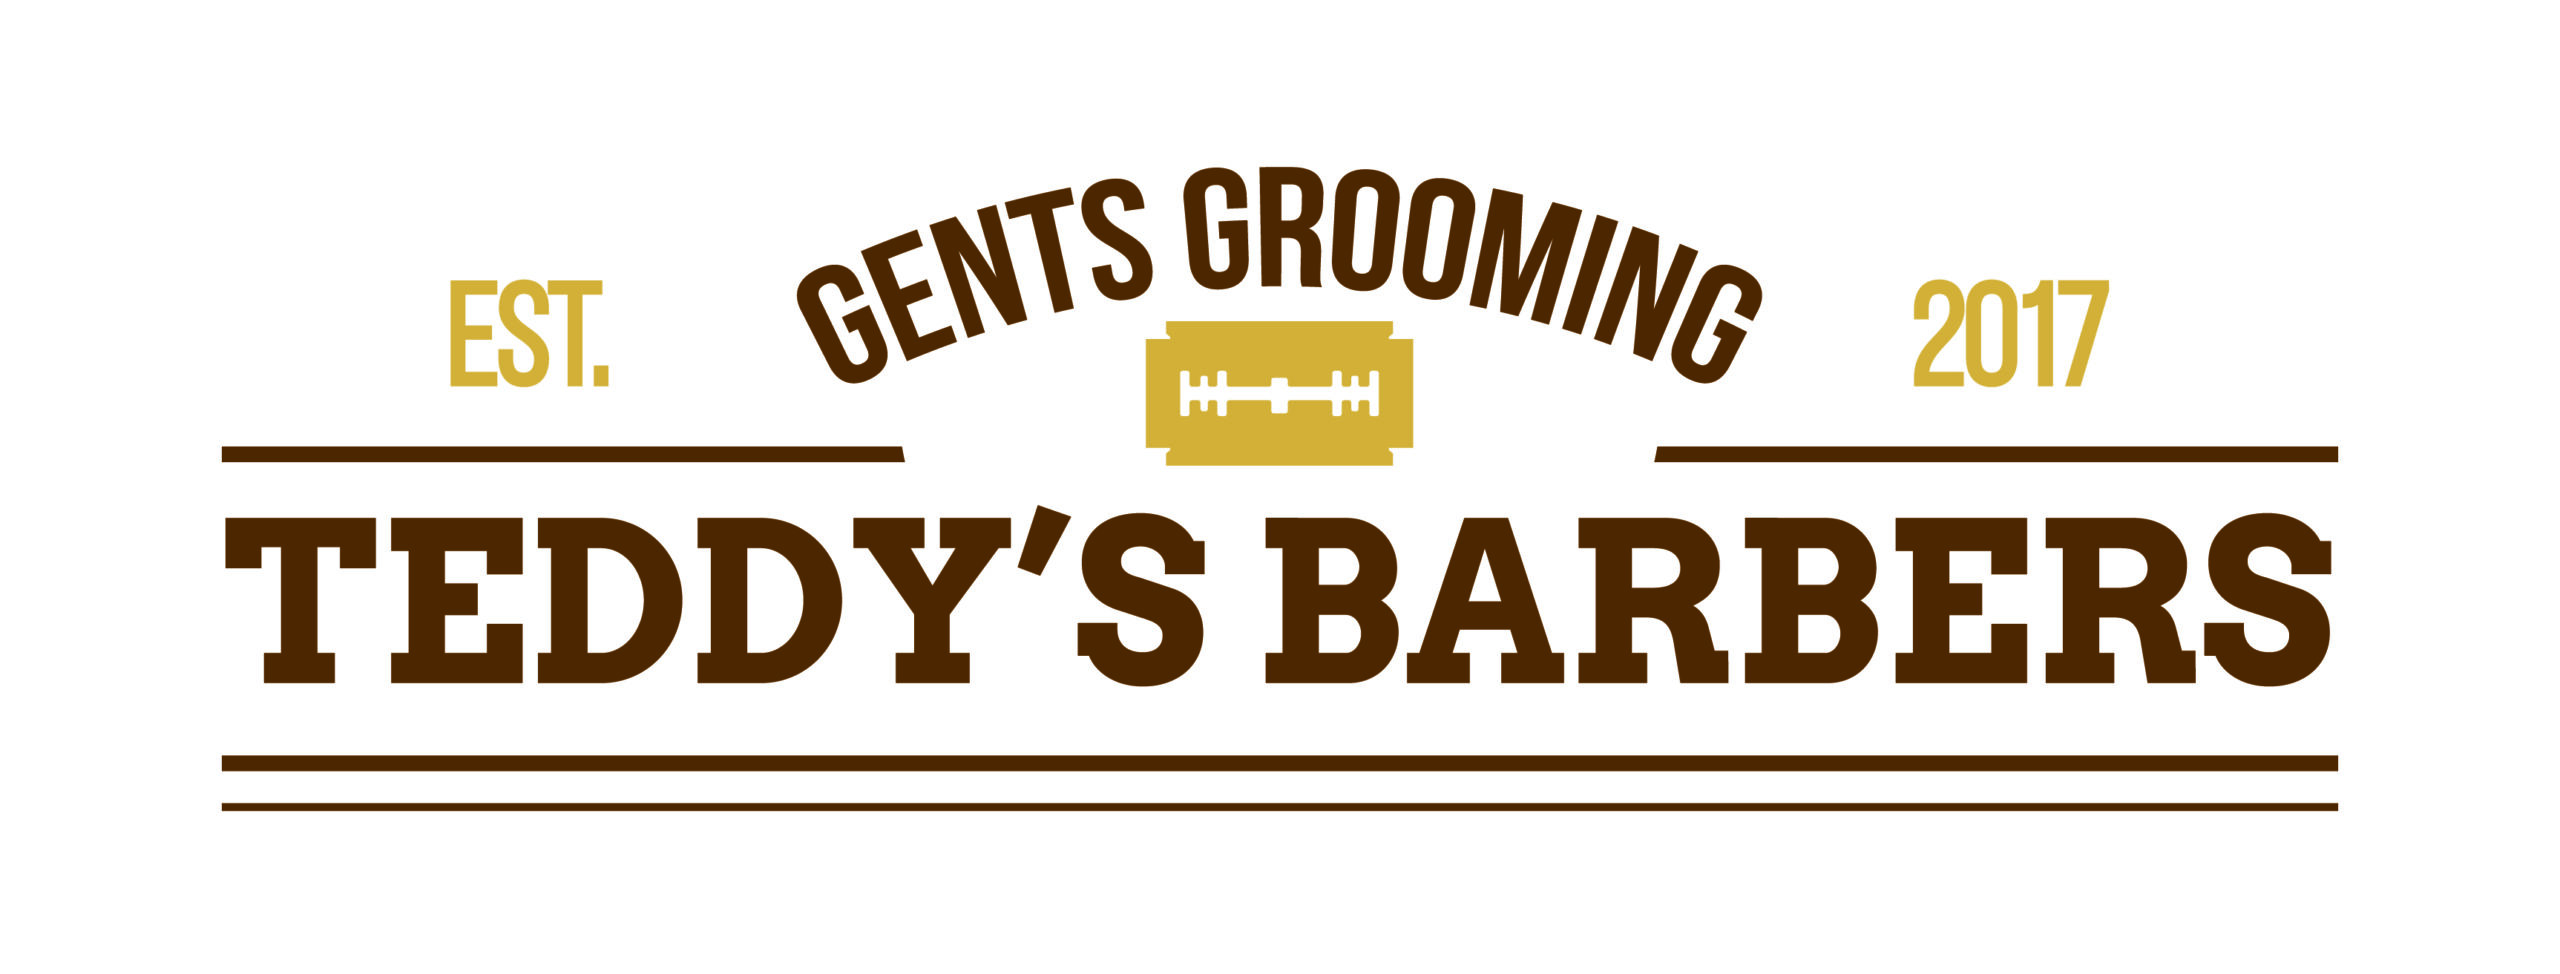 Teddy's Barbers and Gents Grooming